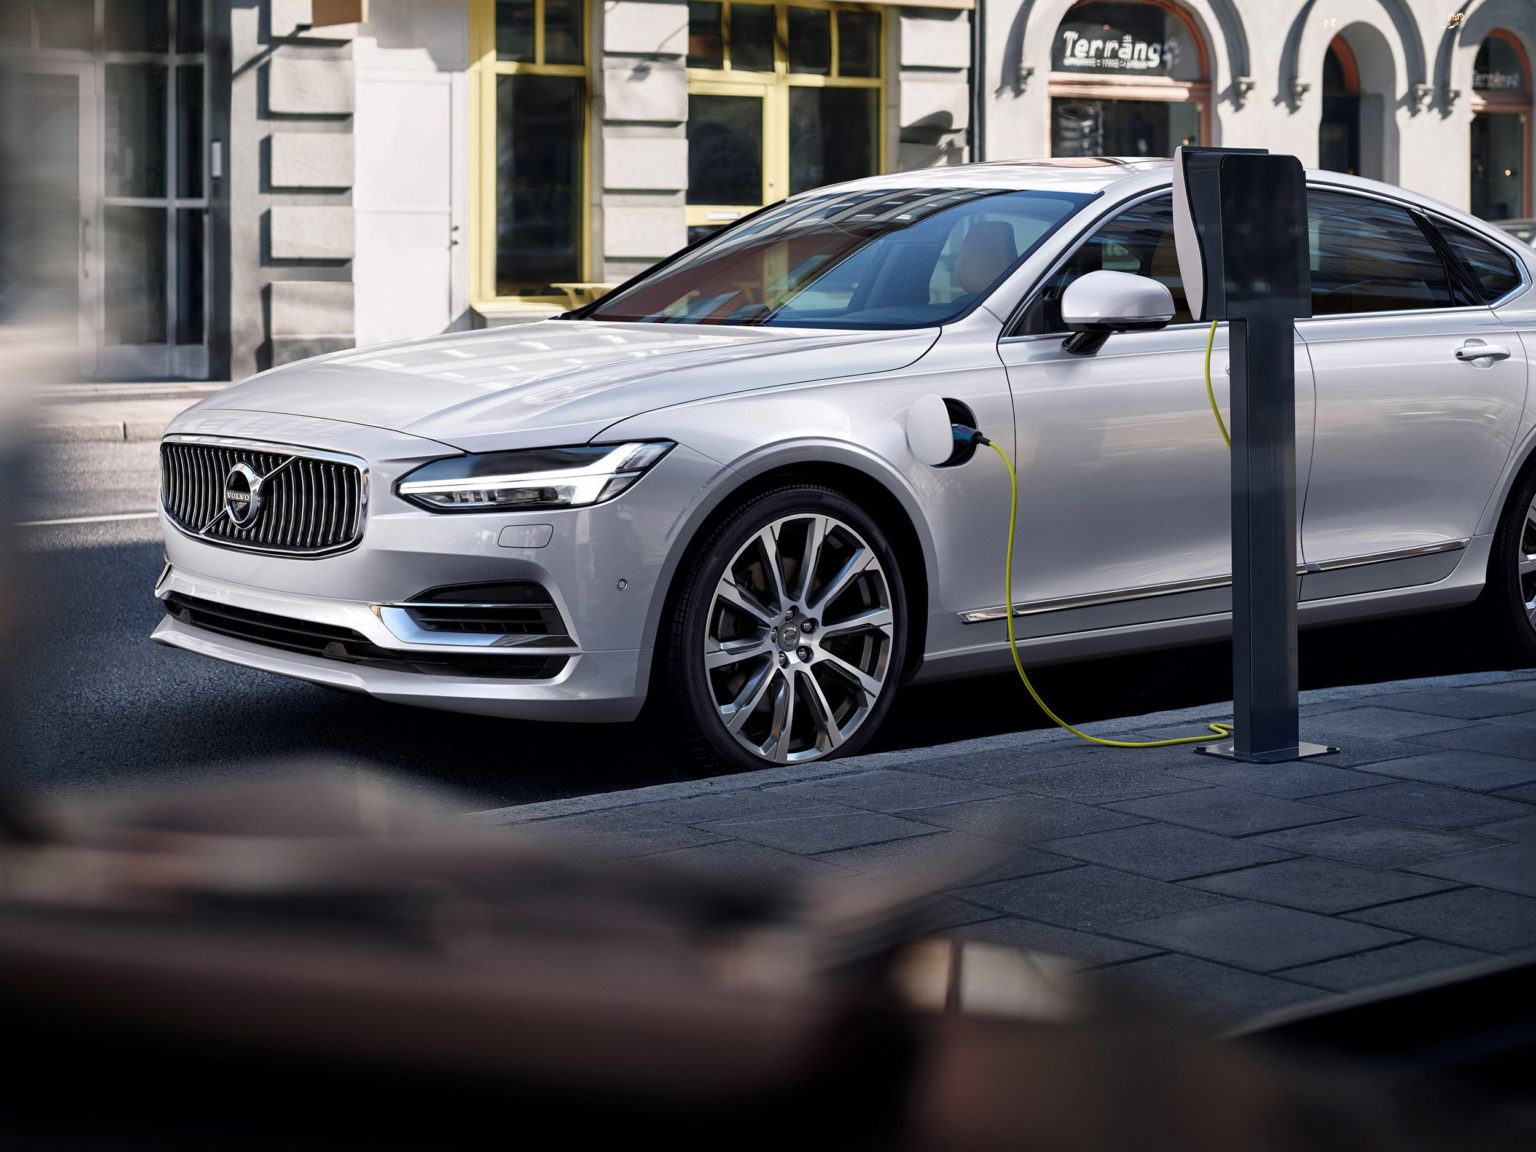 Volvo is moving forward to electrification plans for its fleet.